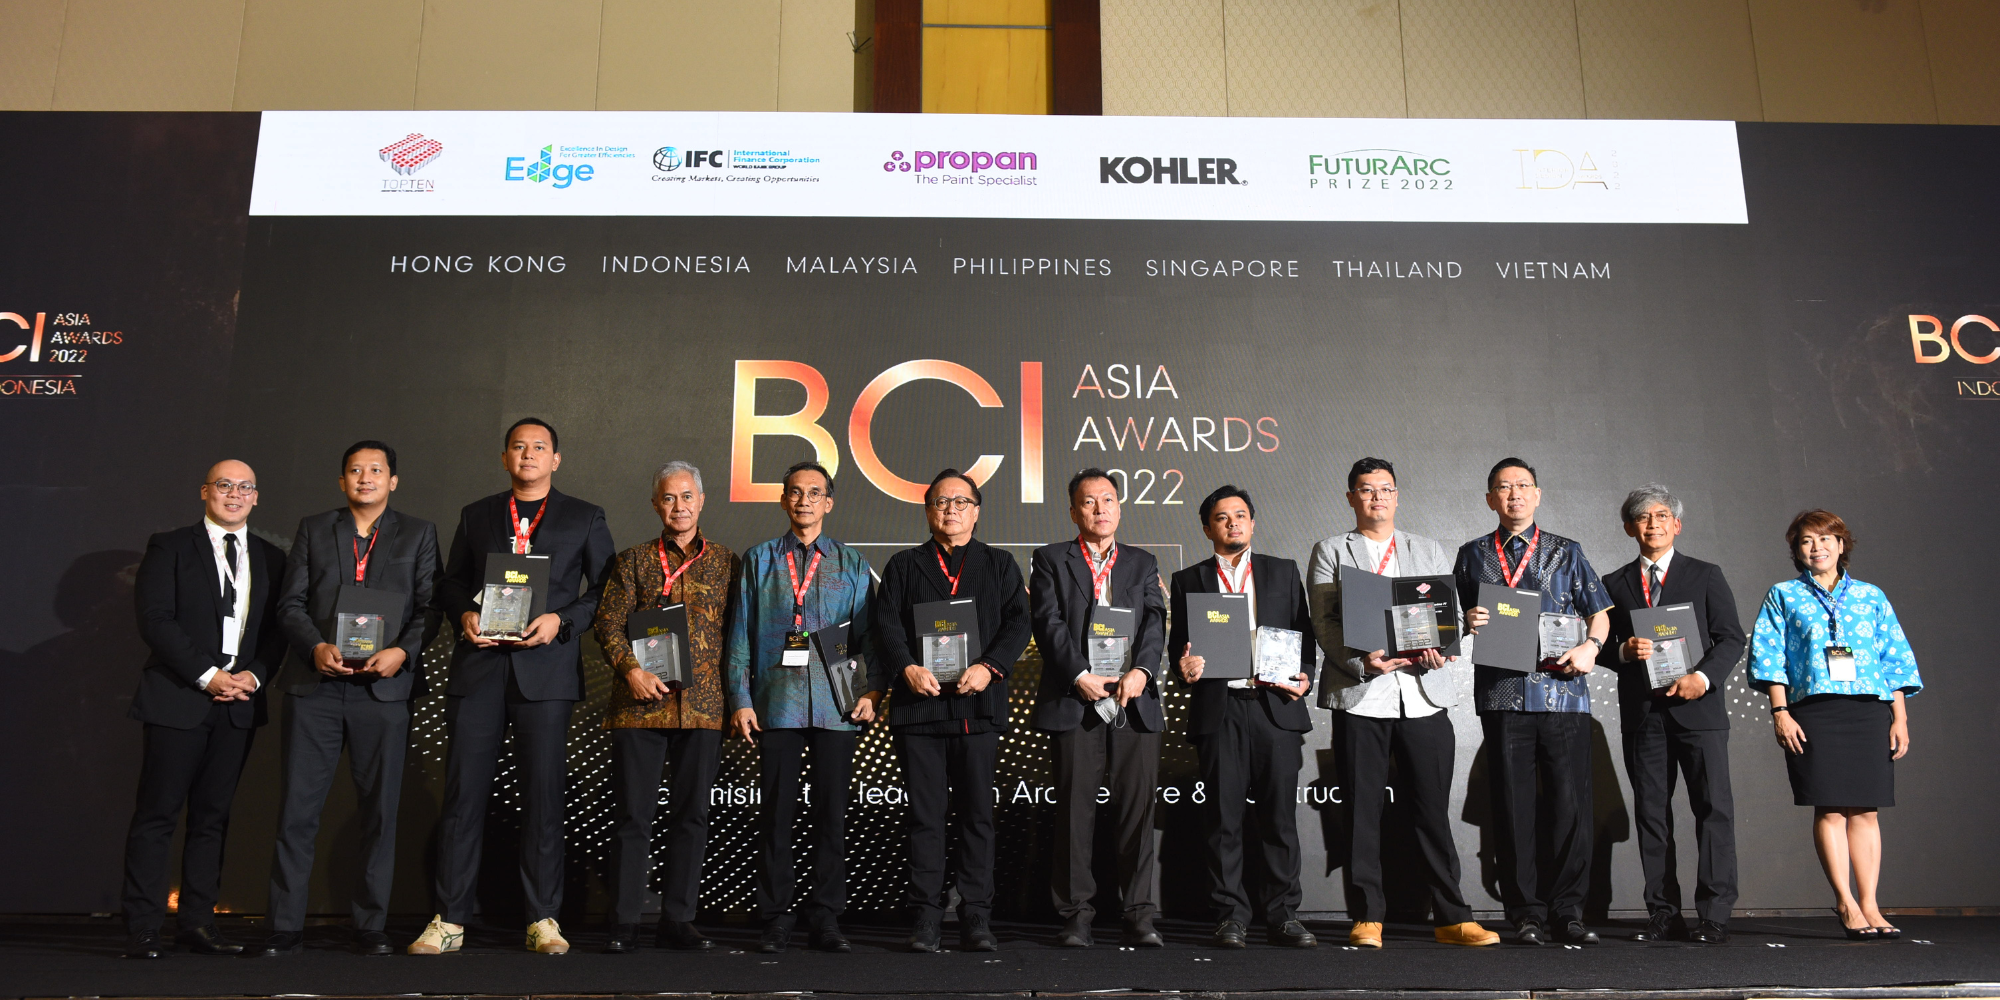 Featured image for “BCI Asia Awards Indonesia 2022”